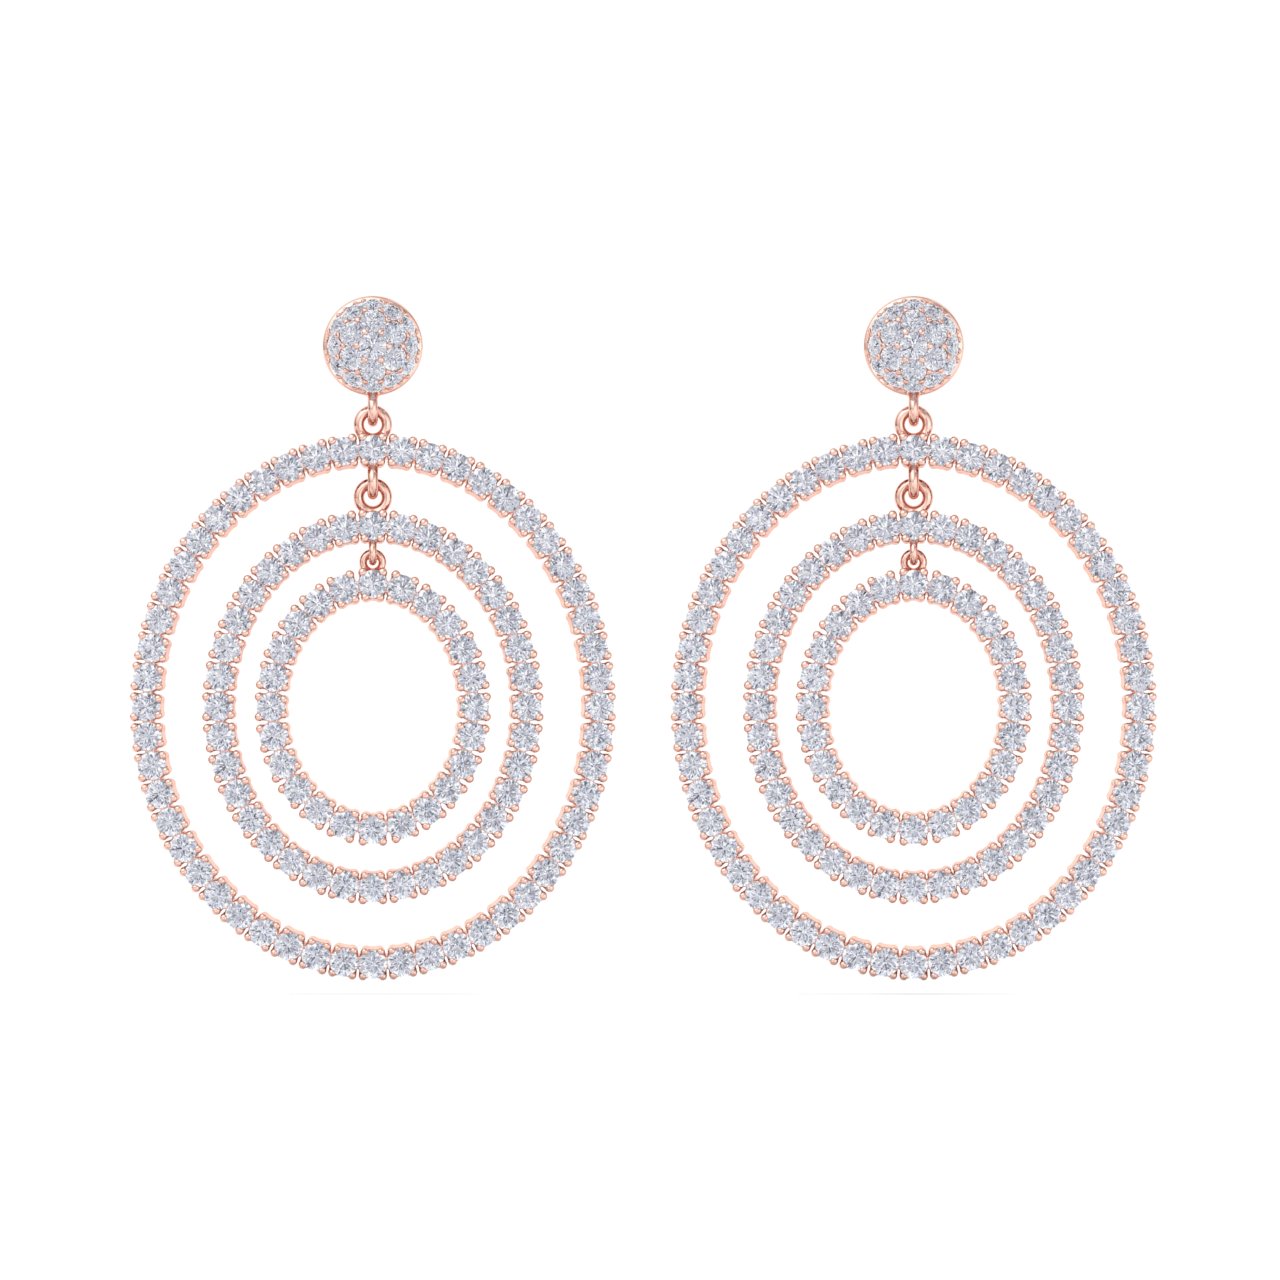 Chandelier earrings in white gold with white diamonds of 8.46 ct in weight